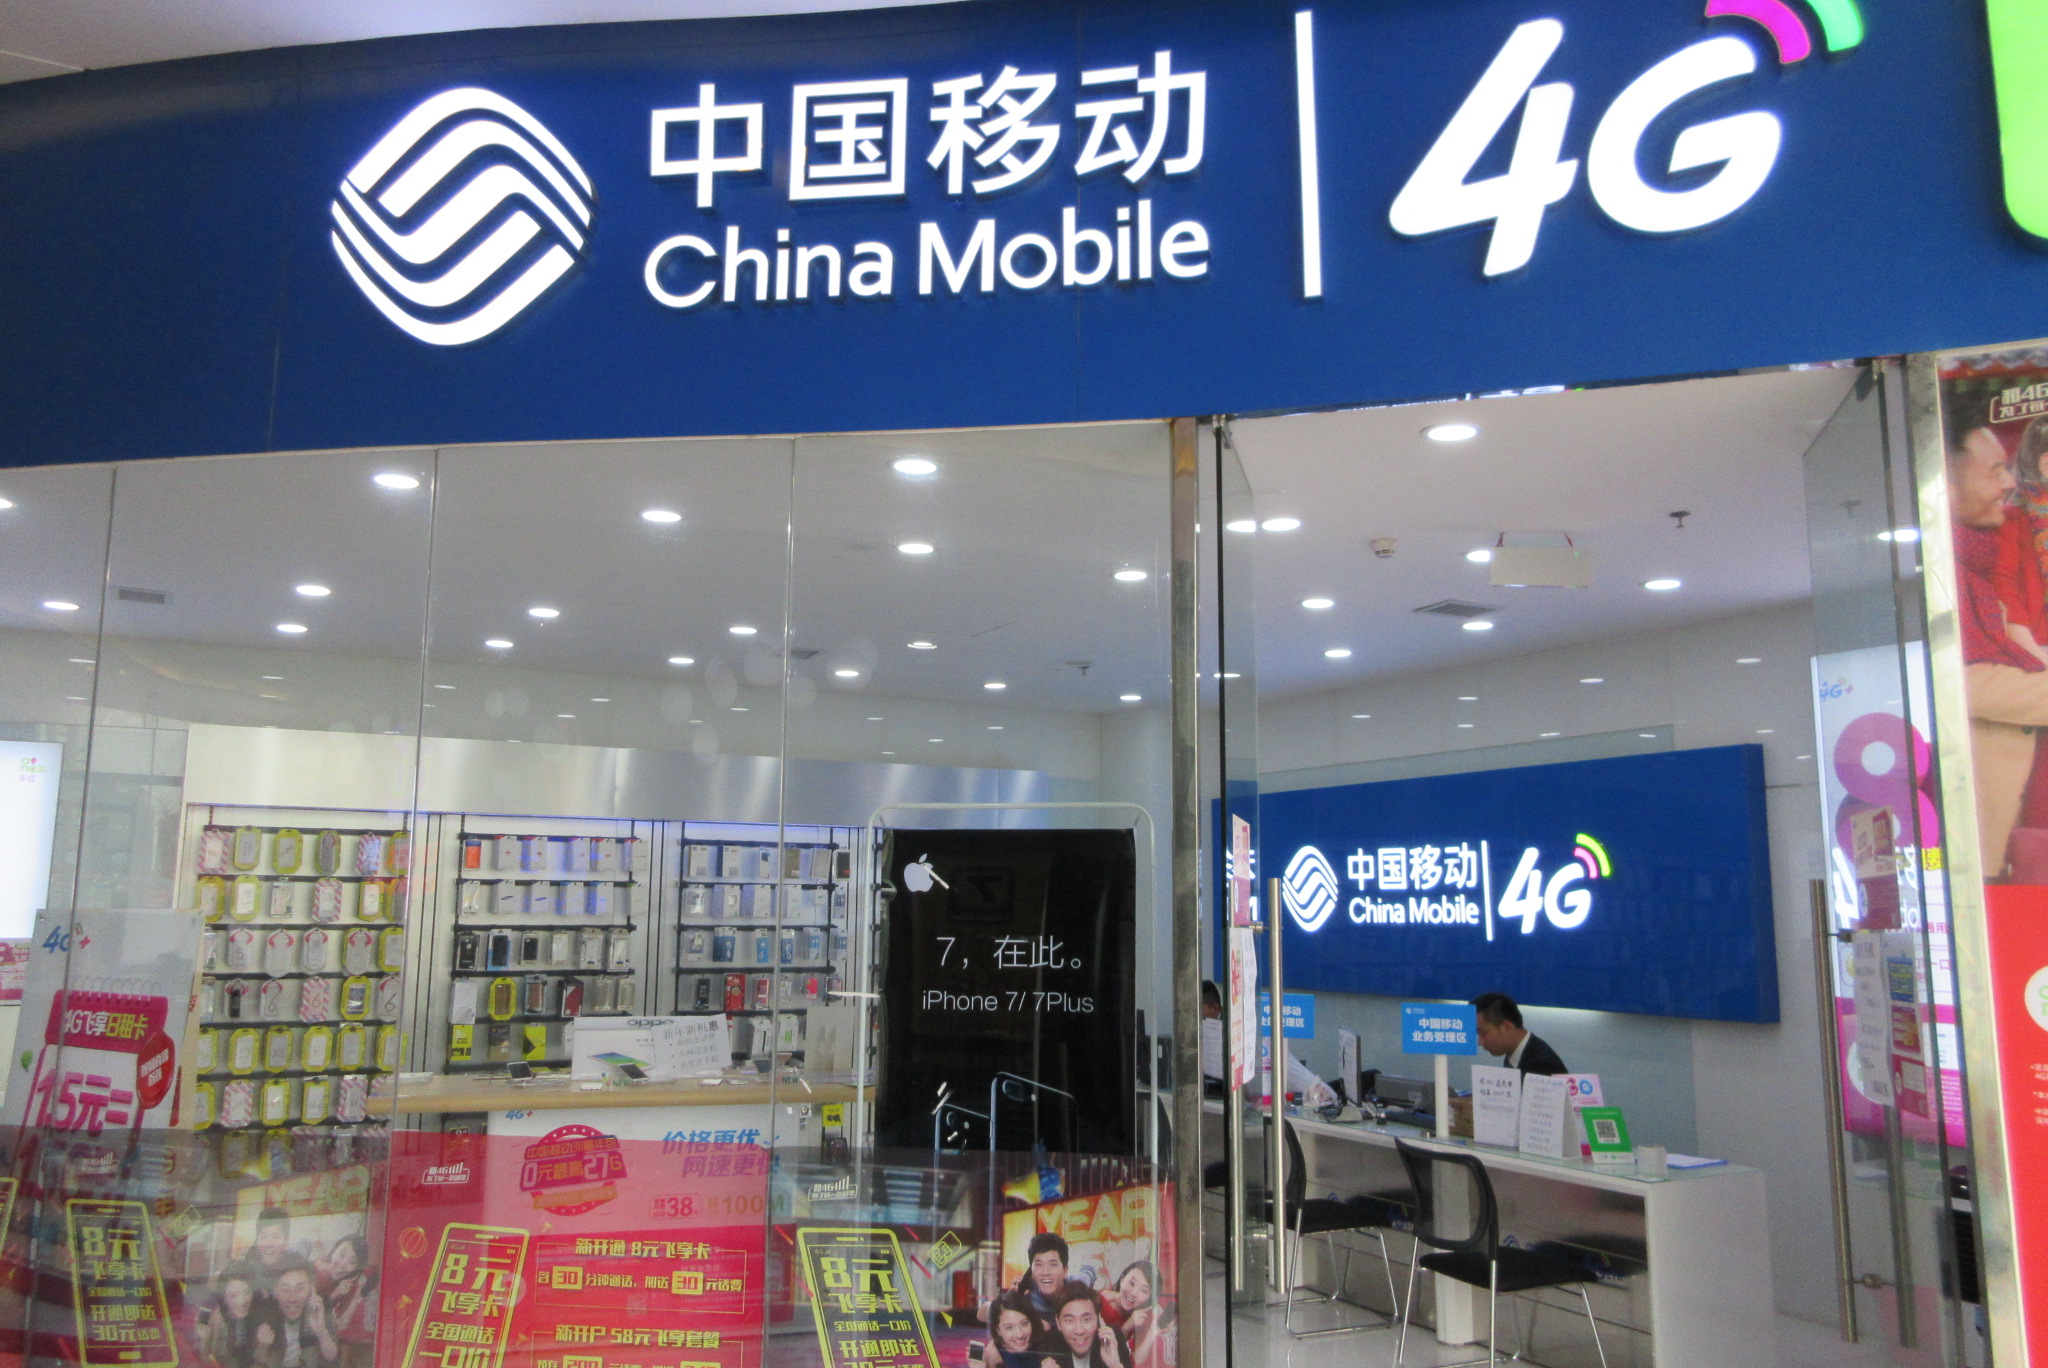 China Mobile store - For RMB 68/month you’d get a 2GB China data plan (mobile internet) in Jiangsu province (4G speed), along with some calling and messaging values.